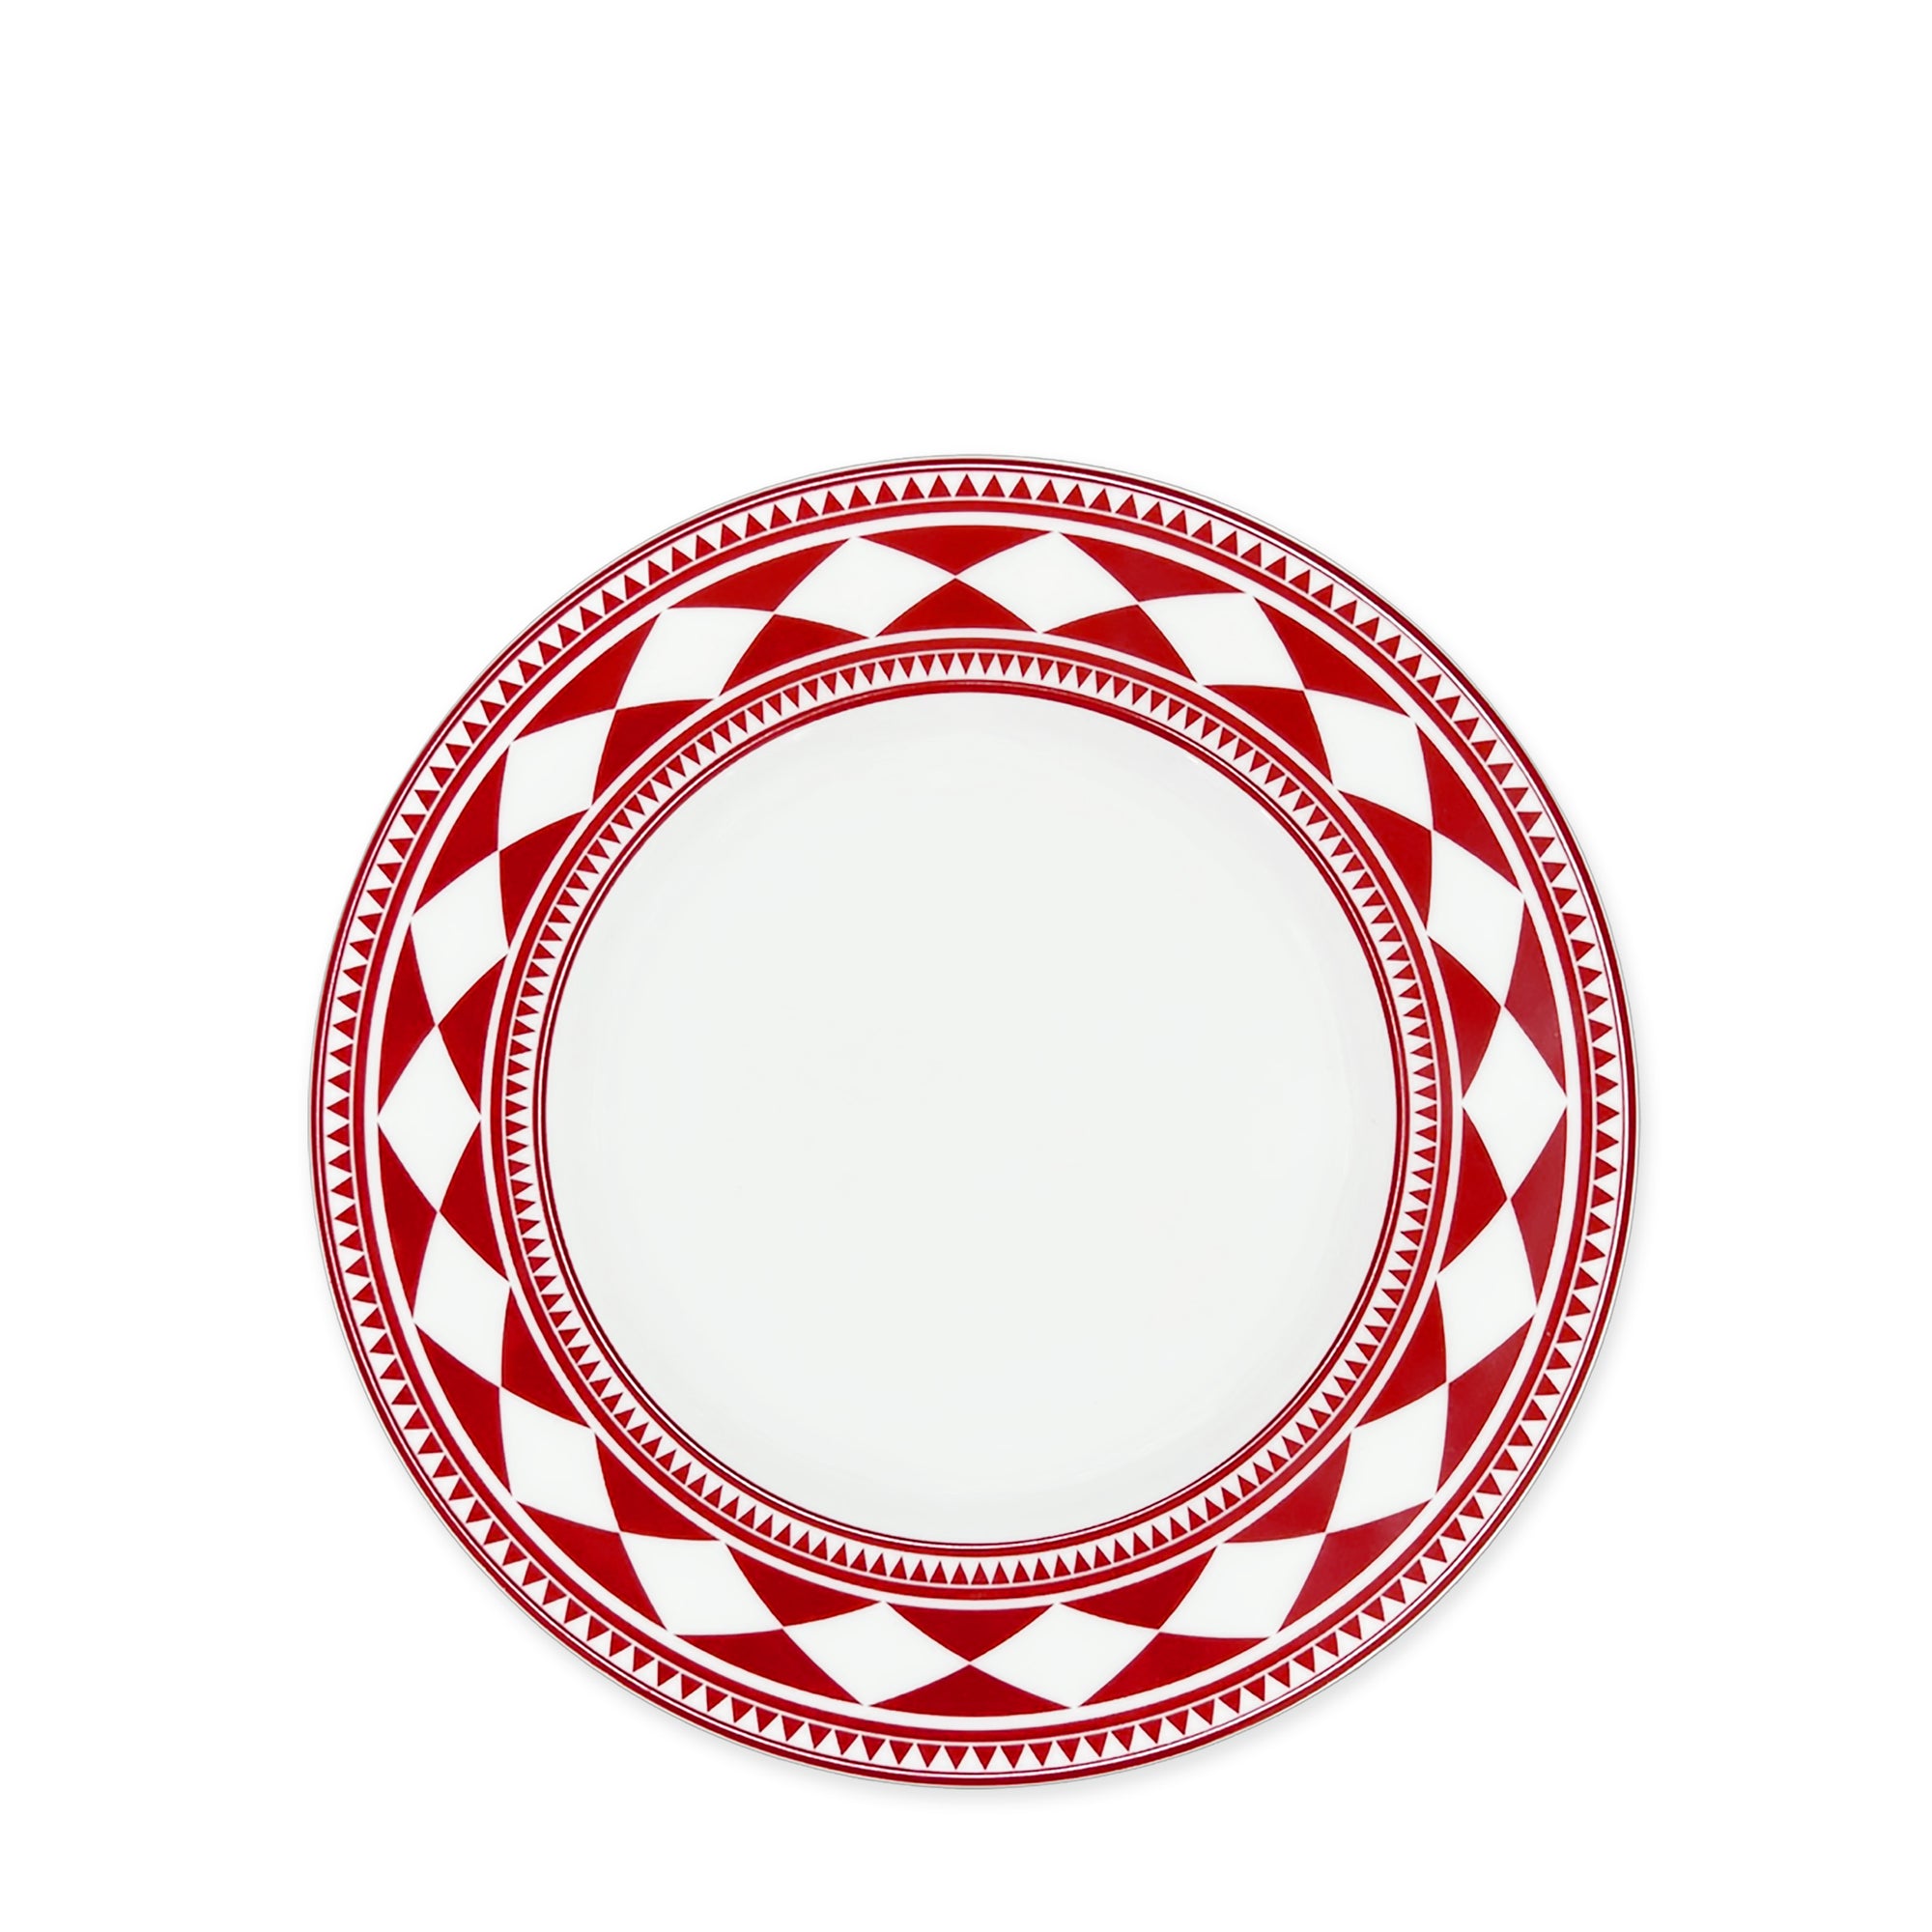 A Fez Crimson Rimmed Salad Plate from Caskata Artisanal Home, crafted from high-fired porcelain, features a white ceramic base adorned with a striking red and white geometric border inspired by Moroccan patterns of diamonds and triangles.